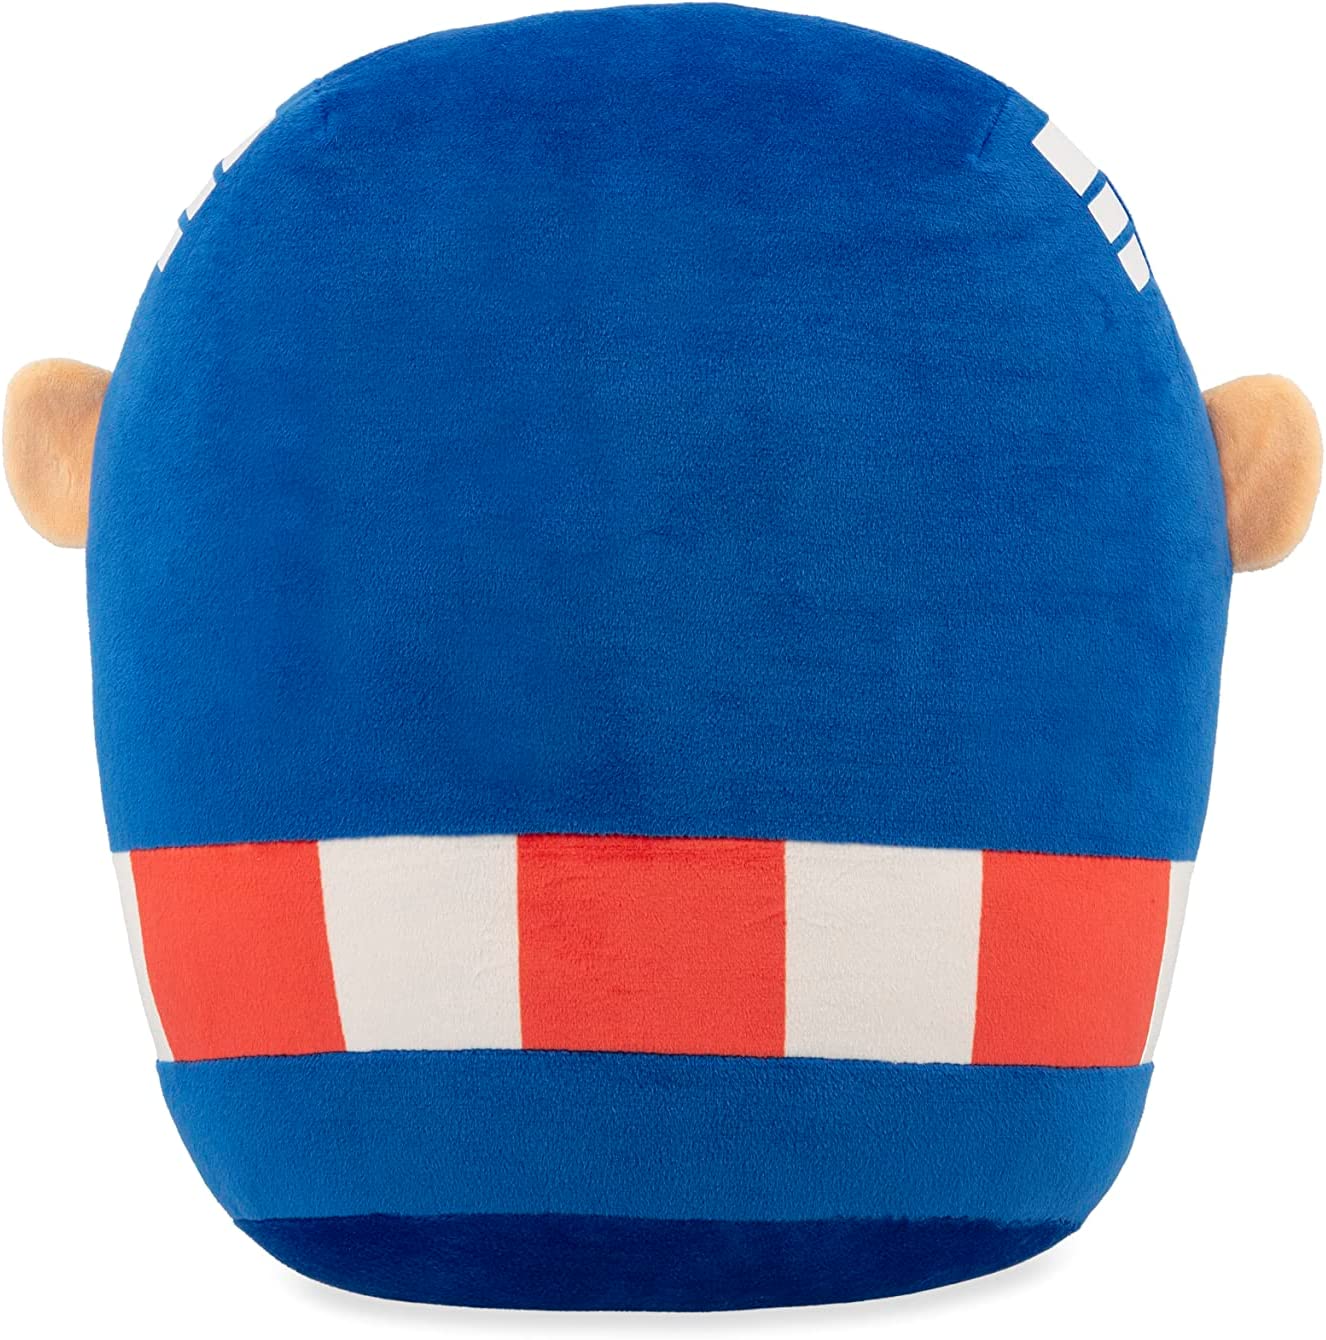 Ty Marvel Avengers Captain America Squish-A-Boo 25cm